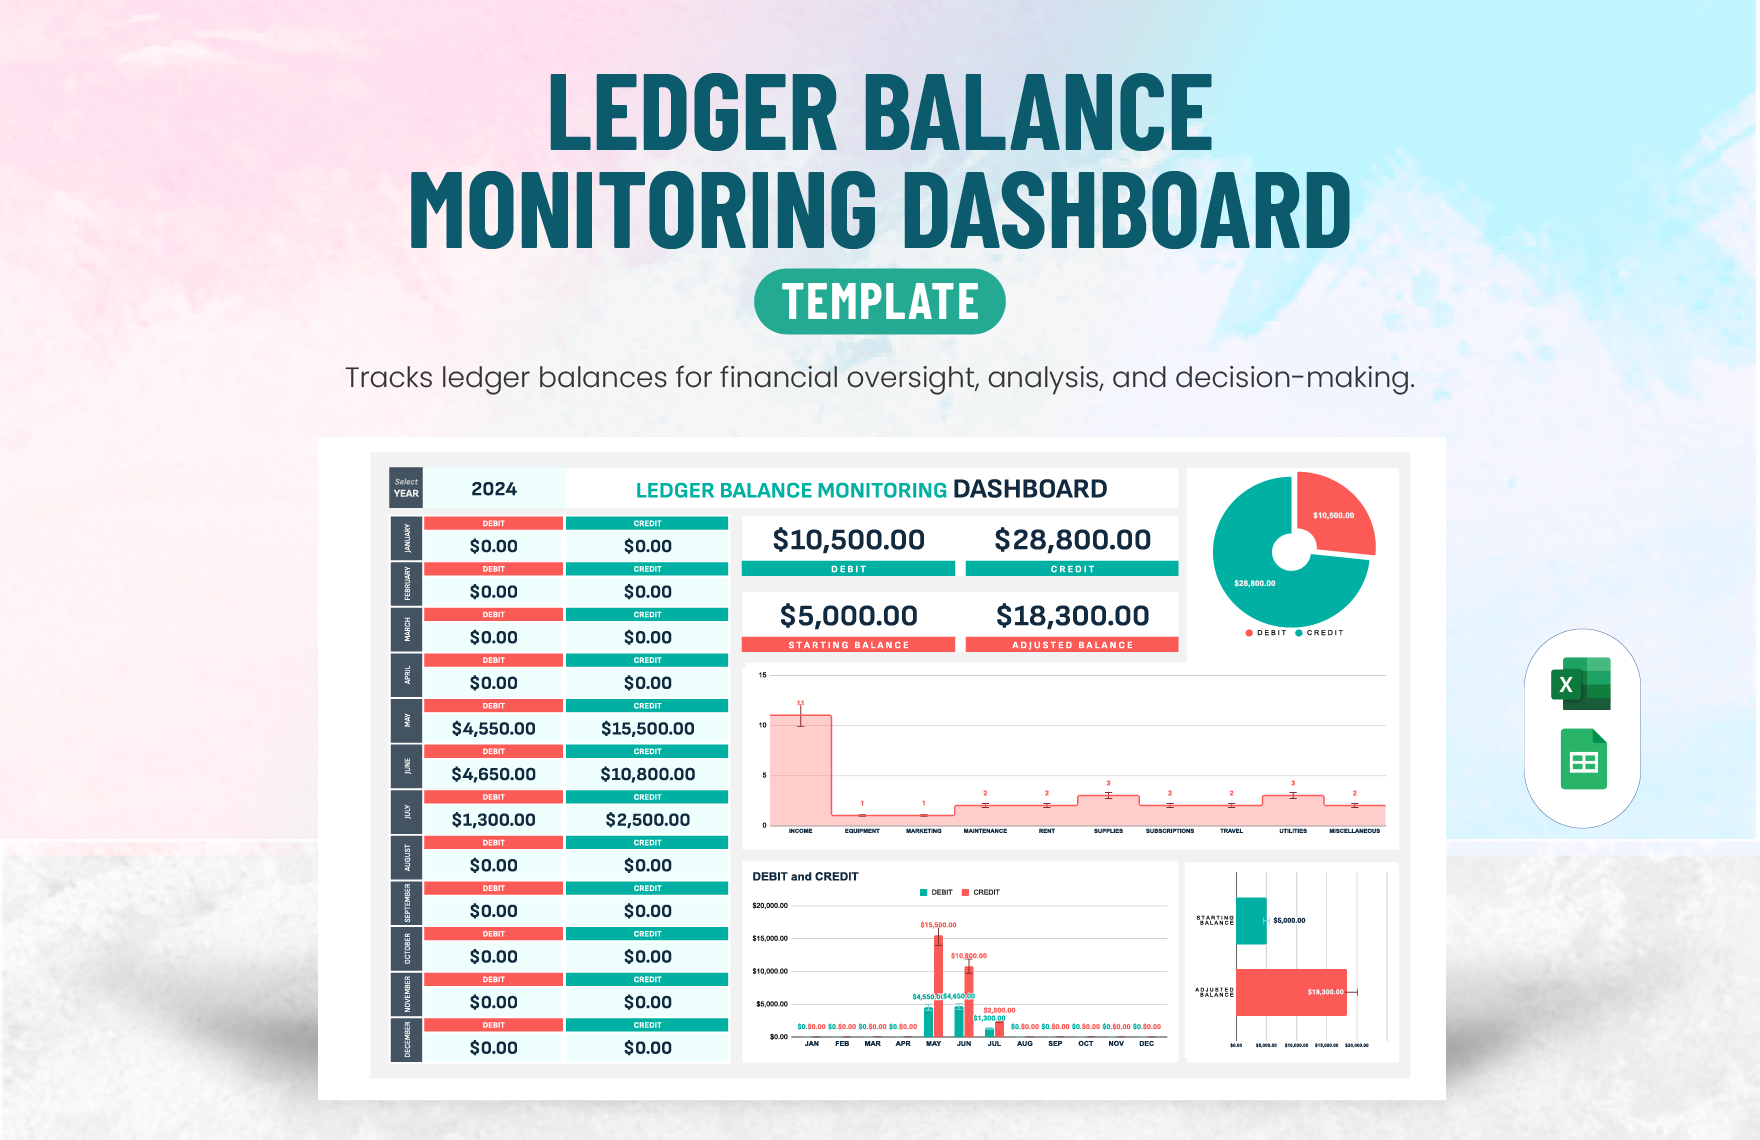 Ledger Balance Monitoring Dashboard Template in Excel, Google Sheets